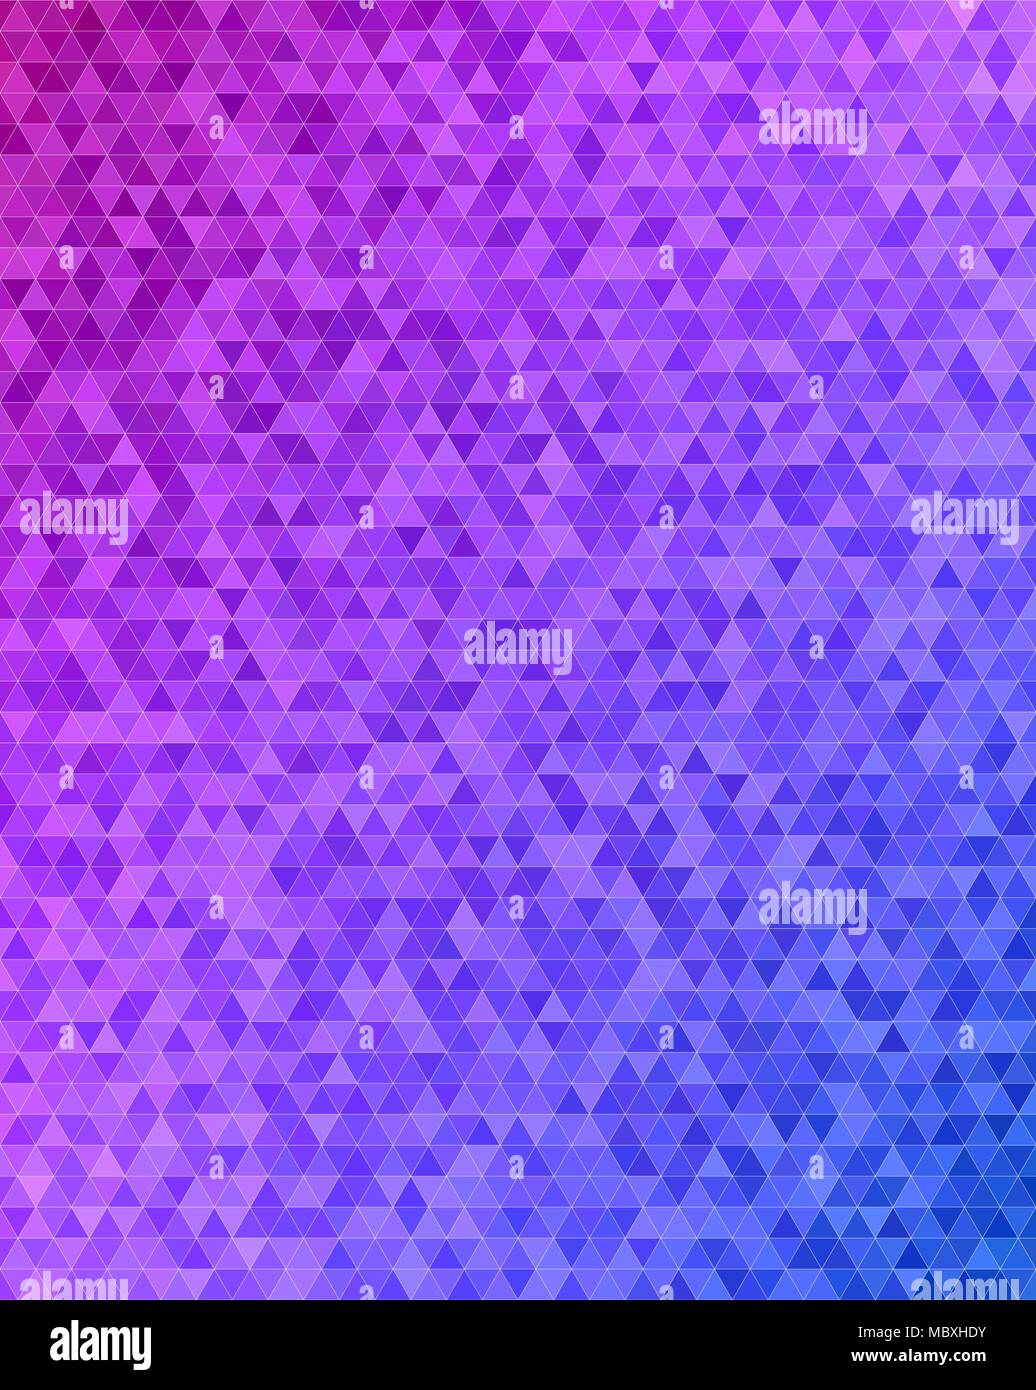 Abstract triangle tile mosaic background design Stock Vector